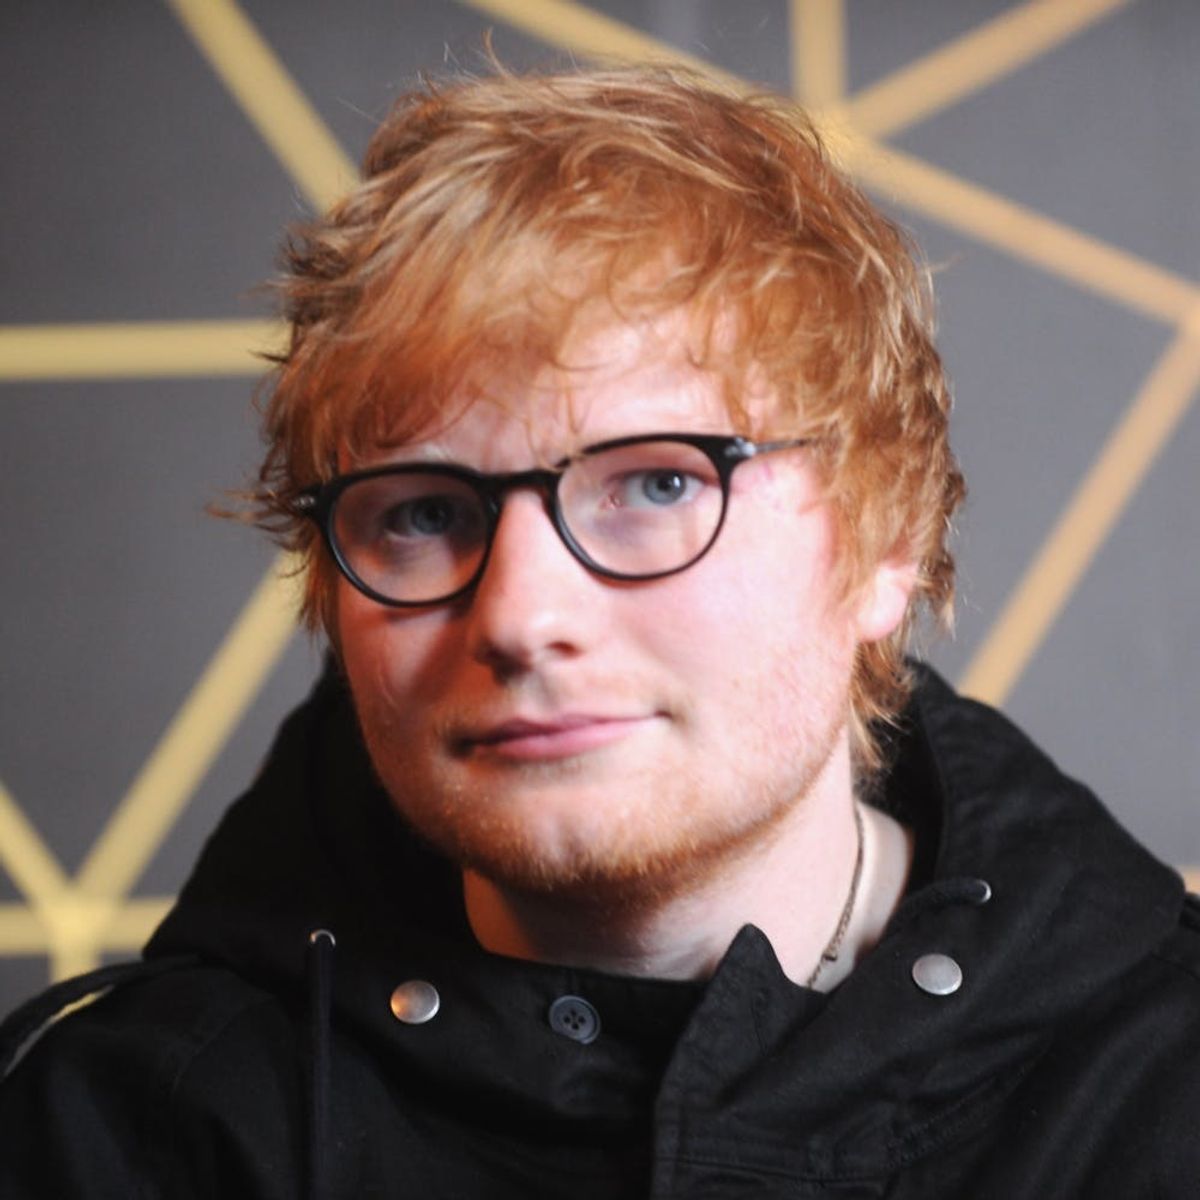 Ed Sheeran’s Next Album Will Be *Very* Different from His Others